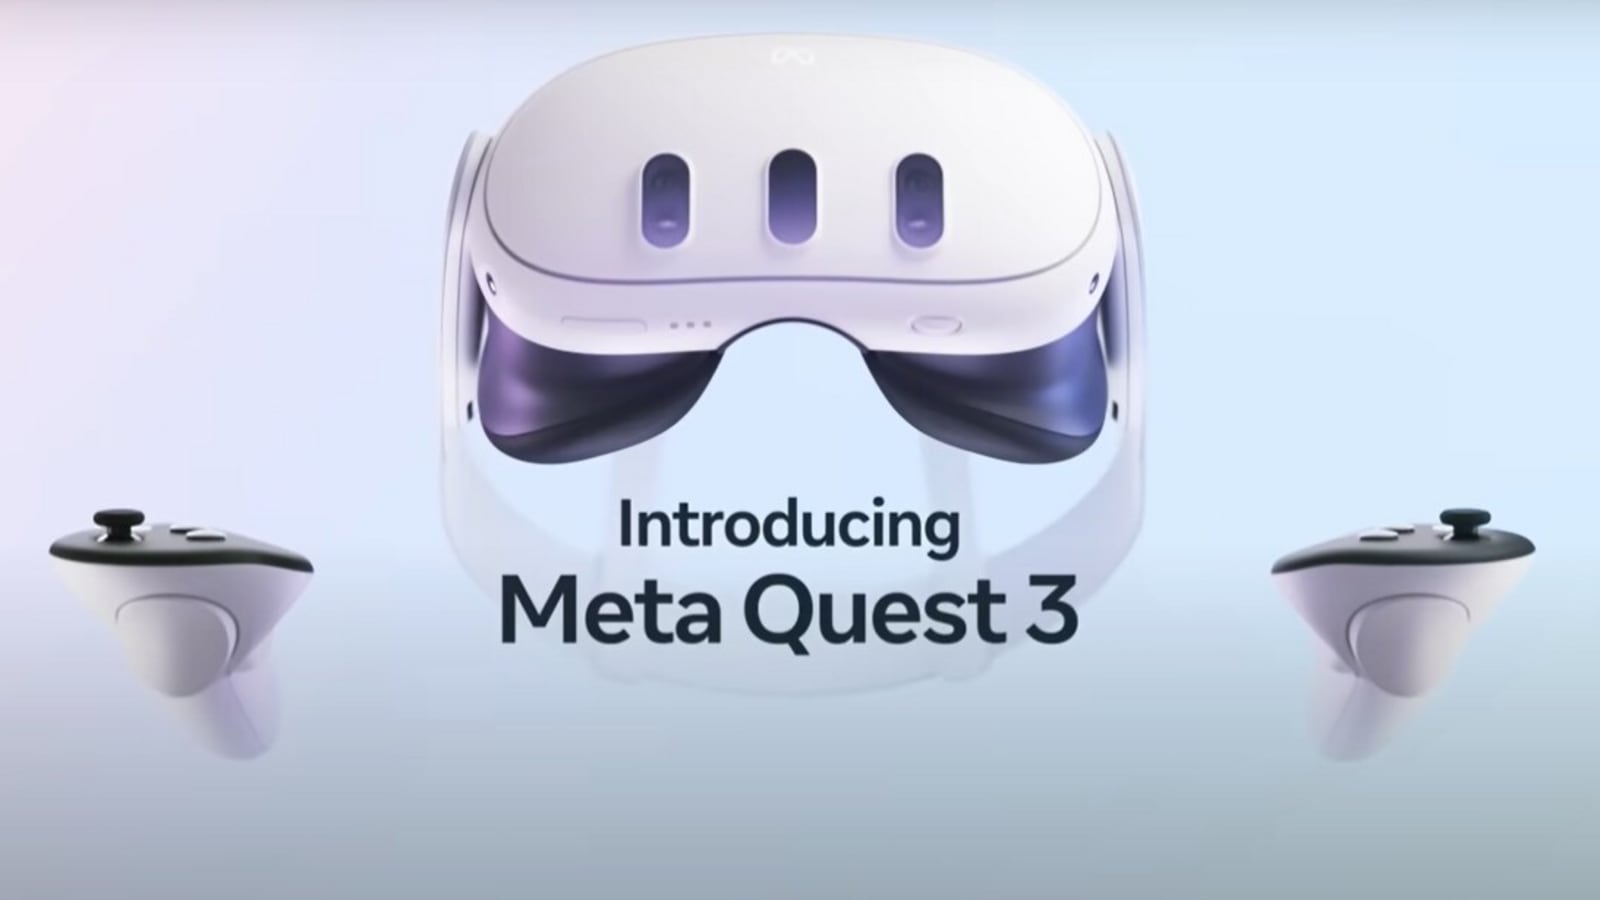 Meta discontinues Quest Pro, work on Quest Pro 2 stopped, report says